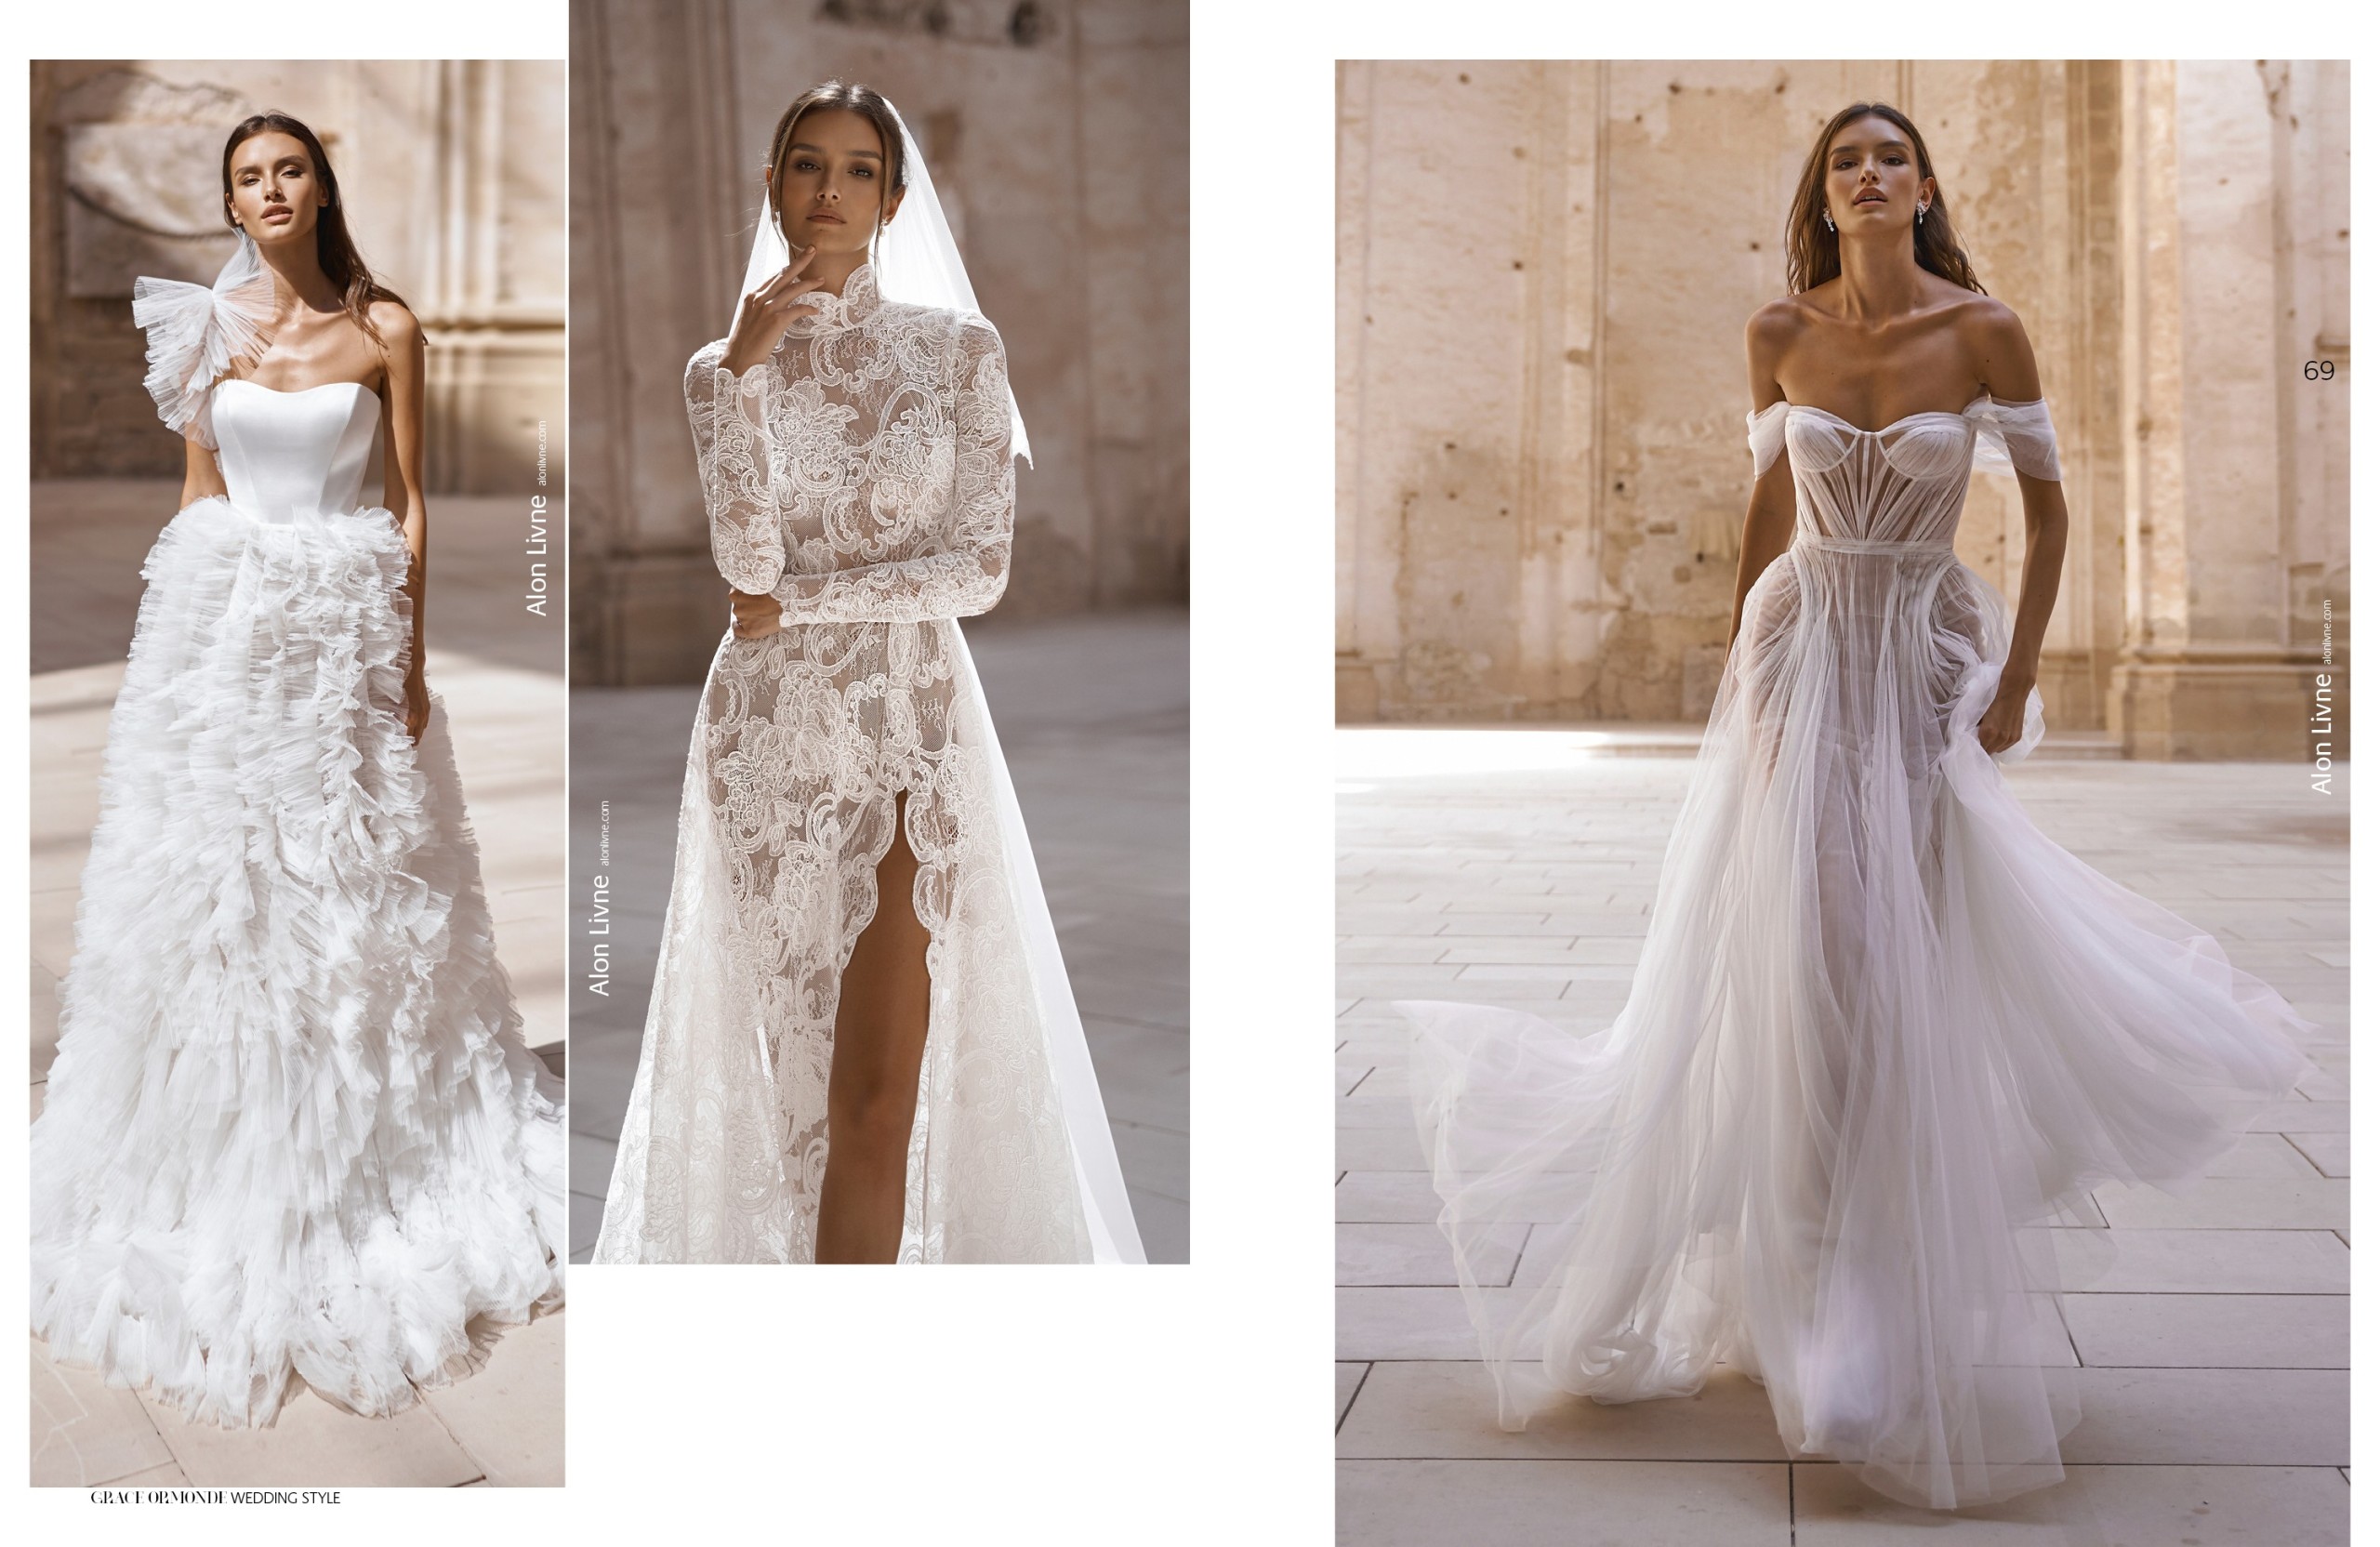 Best Wedding Dresses For Plus Size Females • Exquisite Magazine - Fashion,  Beauty And Lifestyle